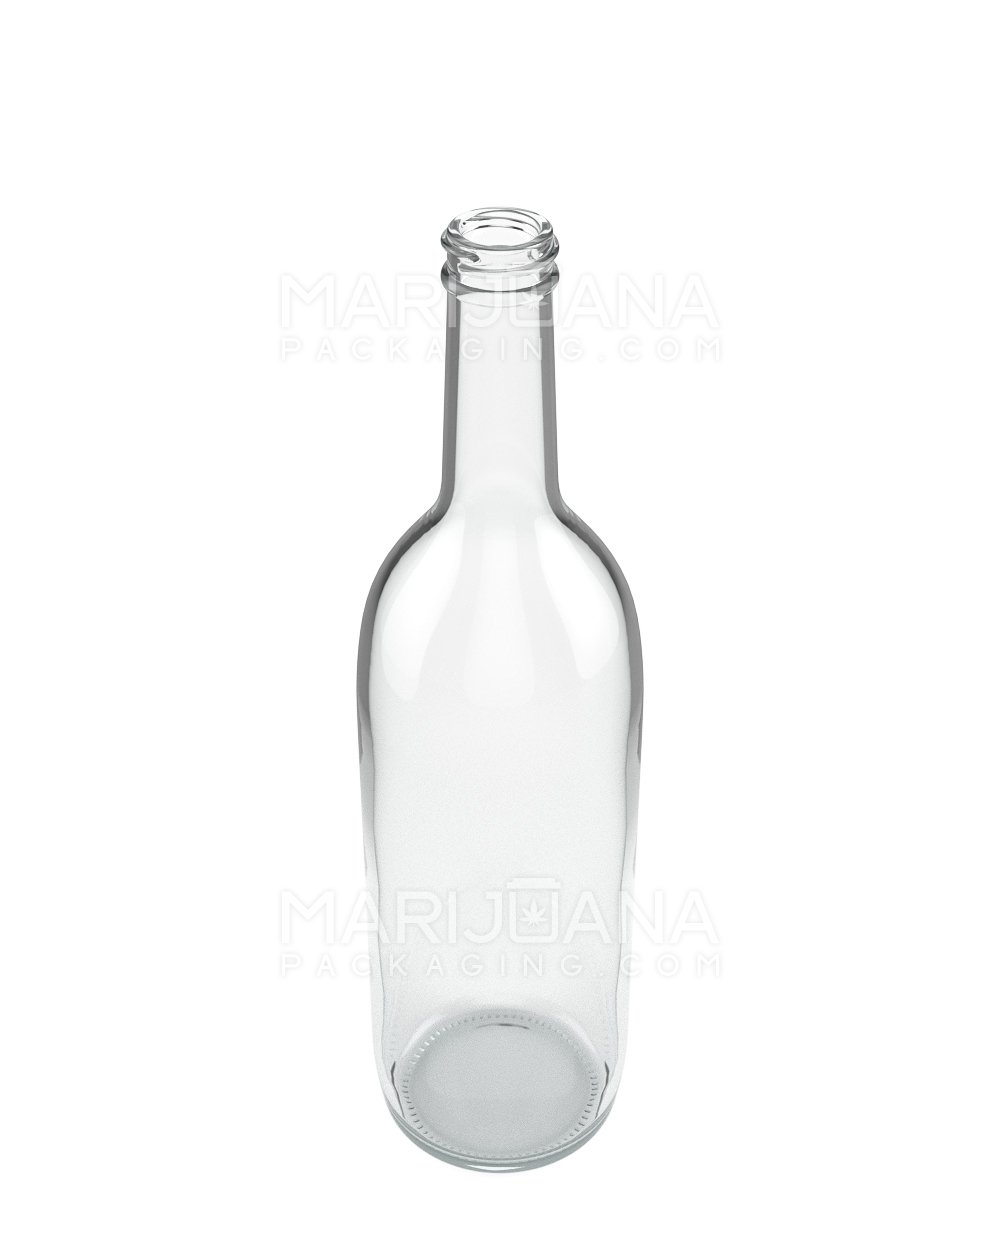 Clear Glass Bottles | 28mm - 750mL - 12 Count - 2